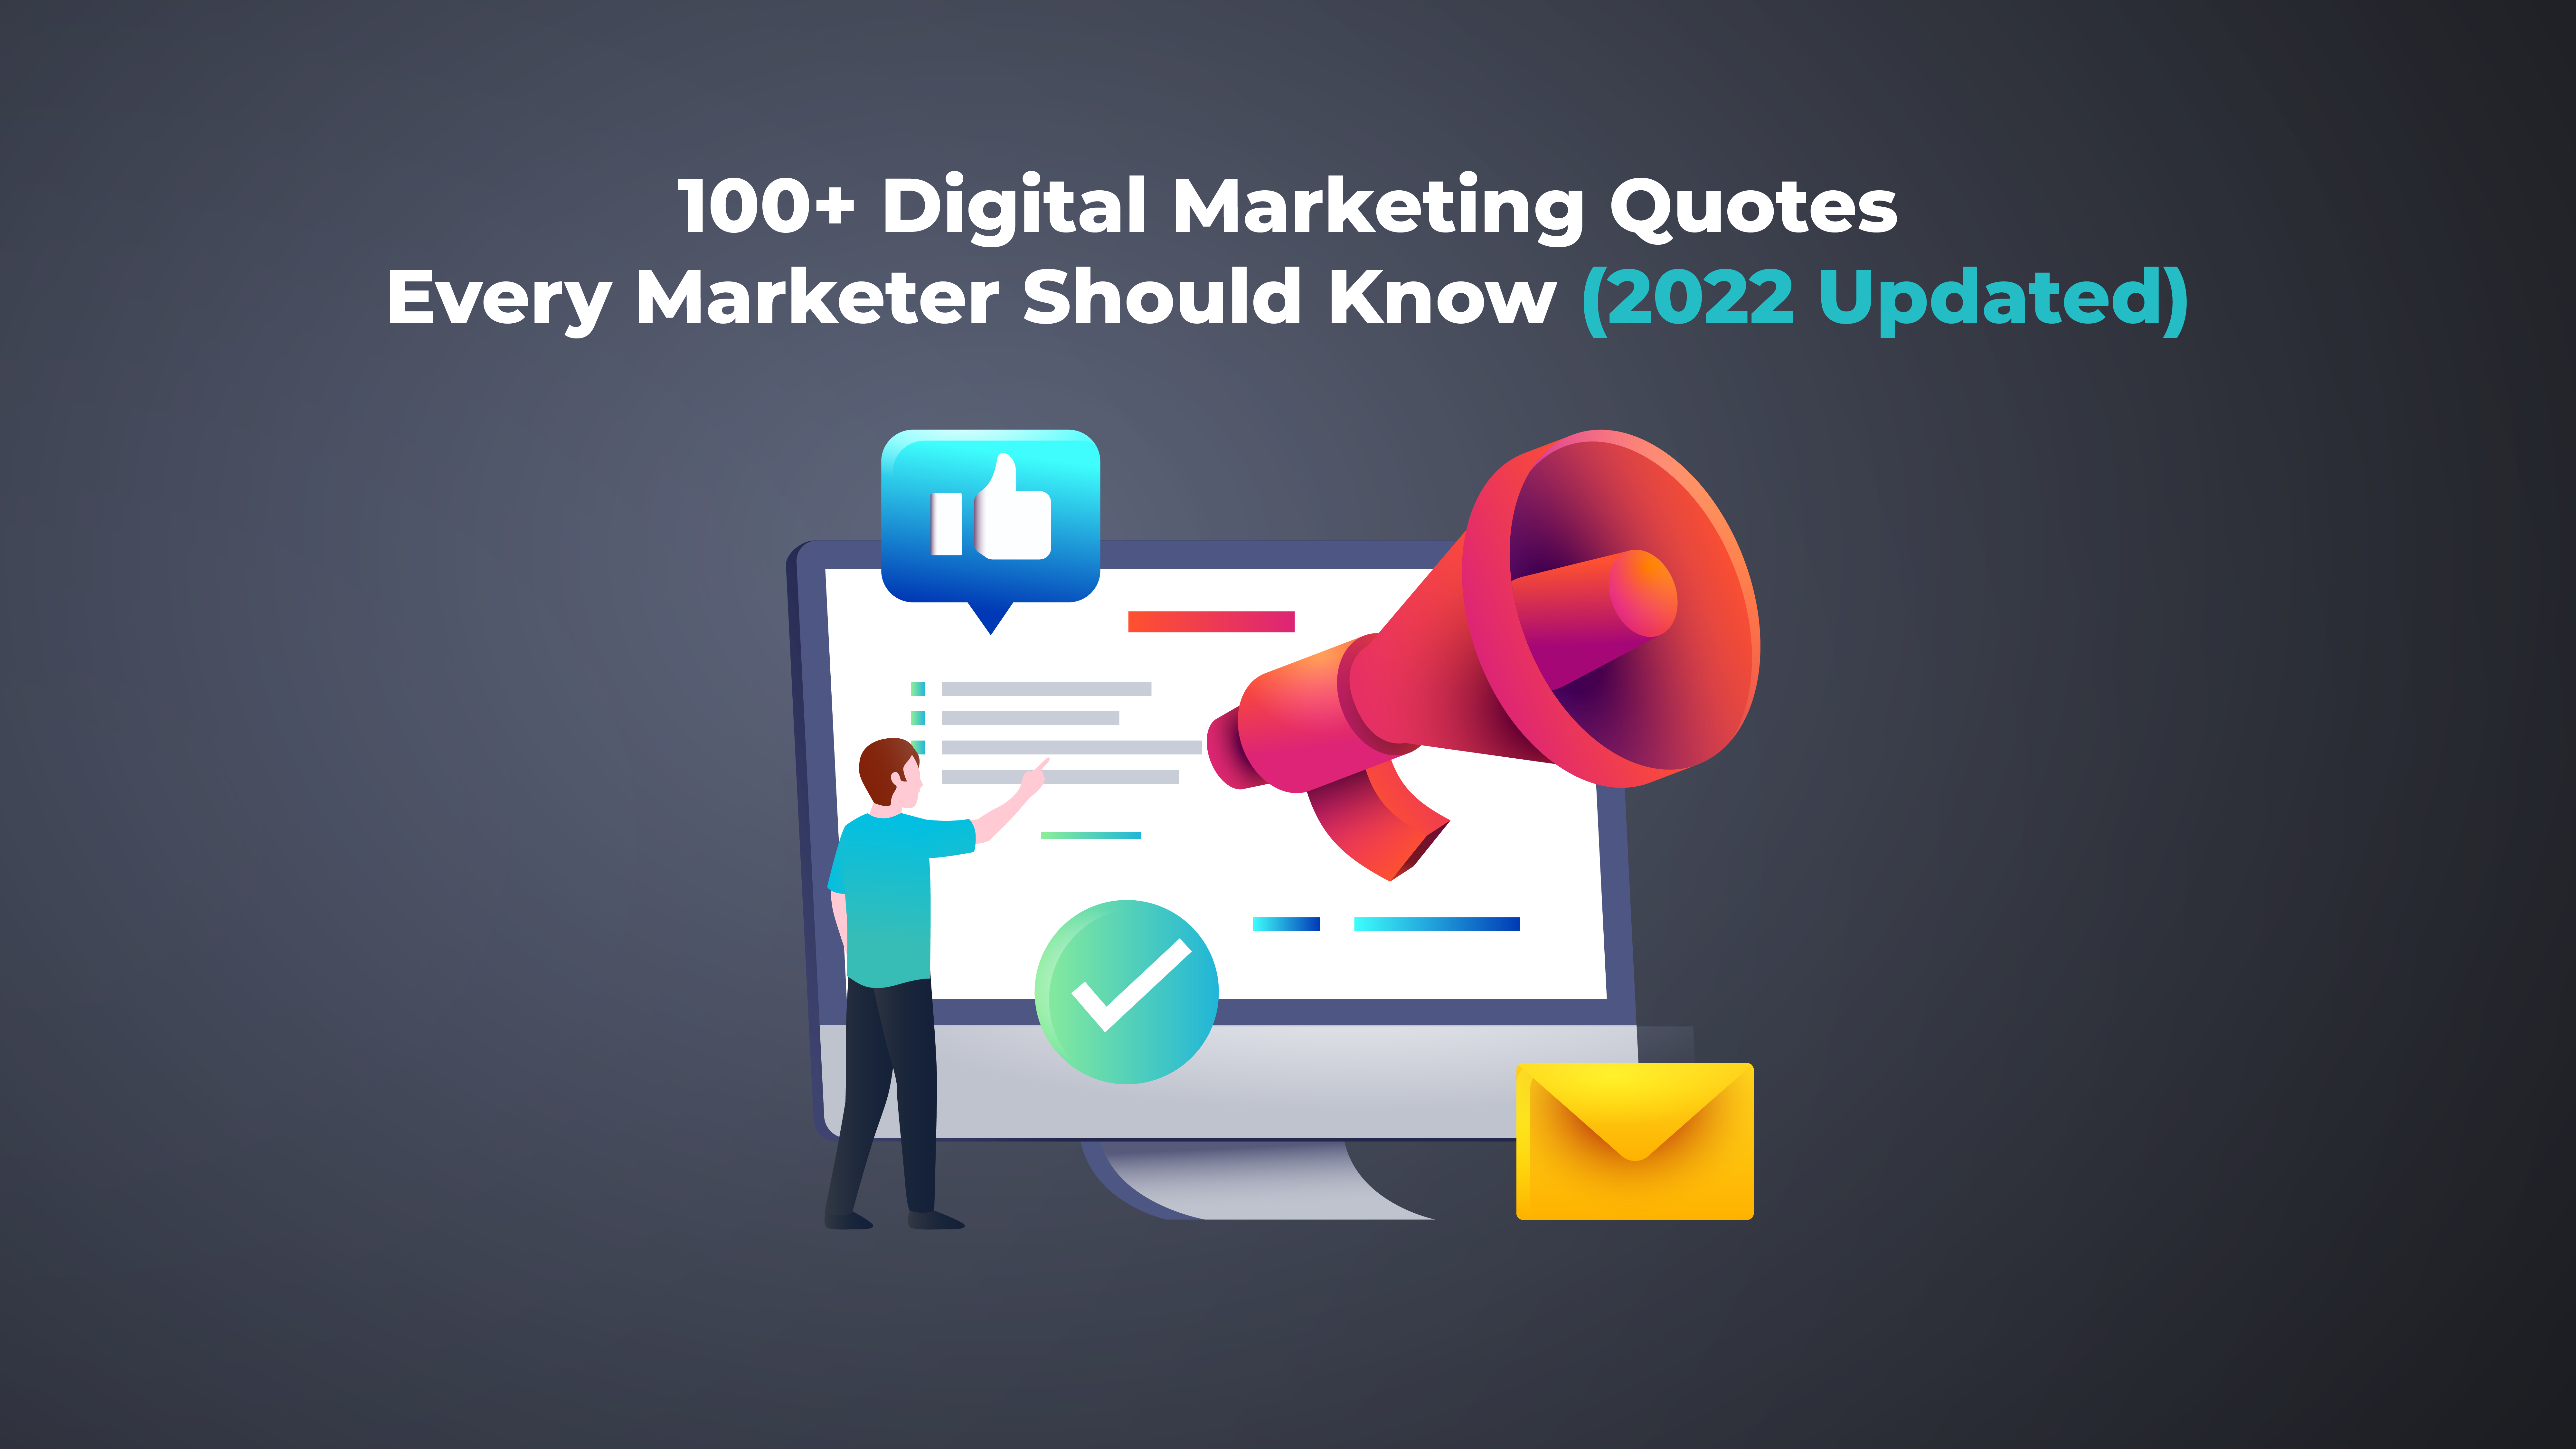 19-100+ Digital Marketing Quotes Every Marketer Should Know (2022 Updated)-20